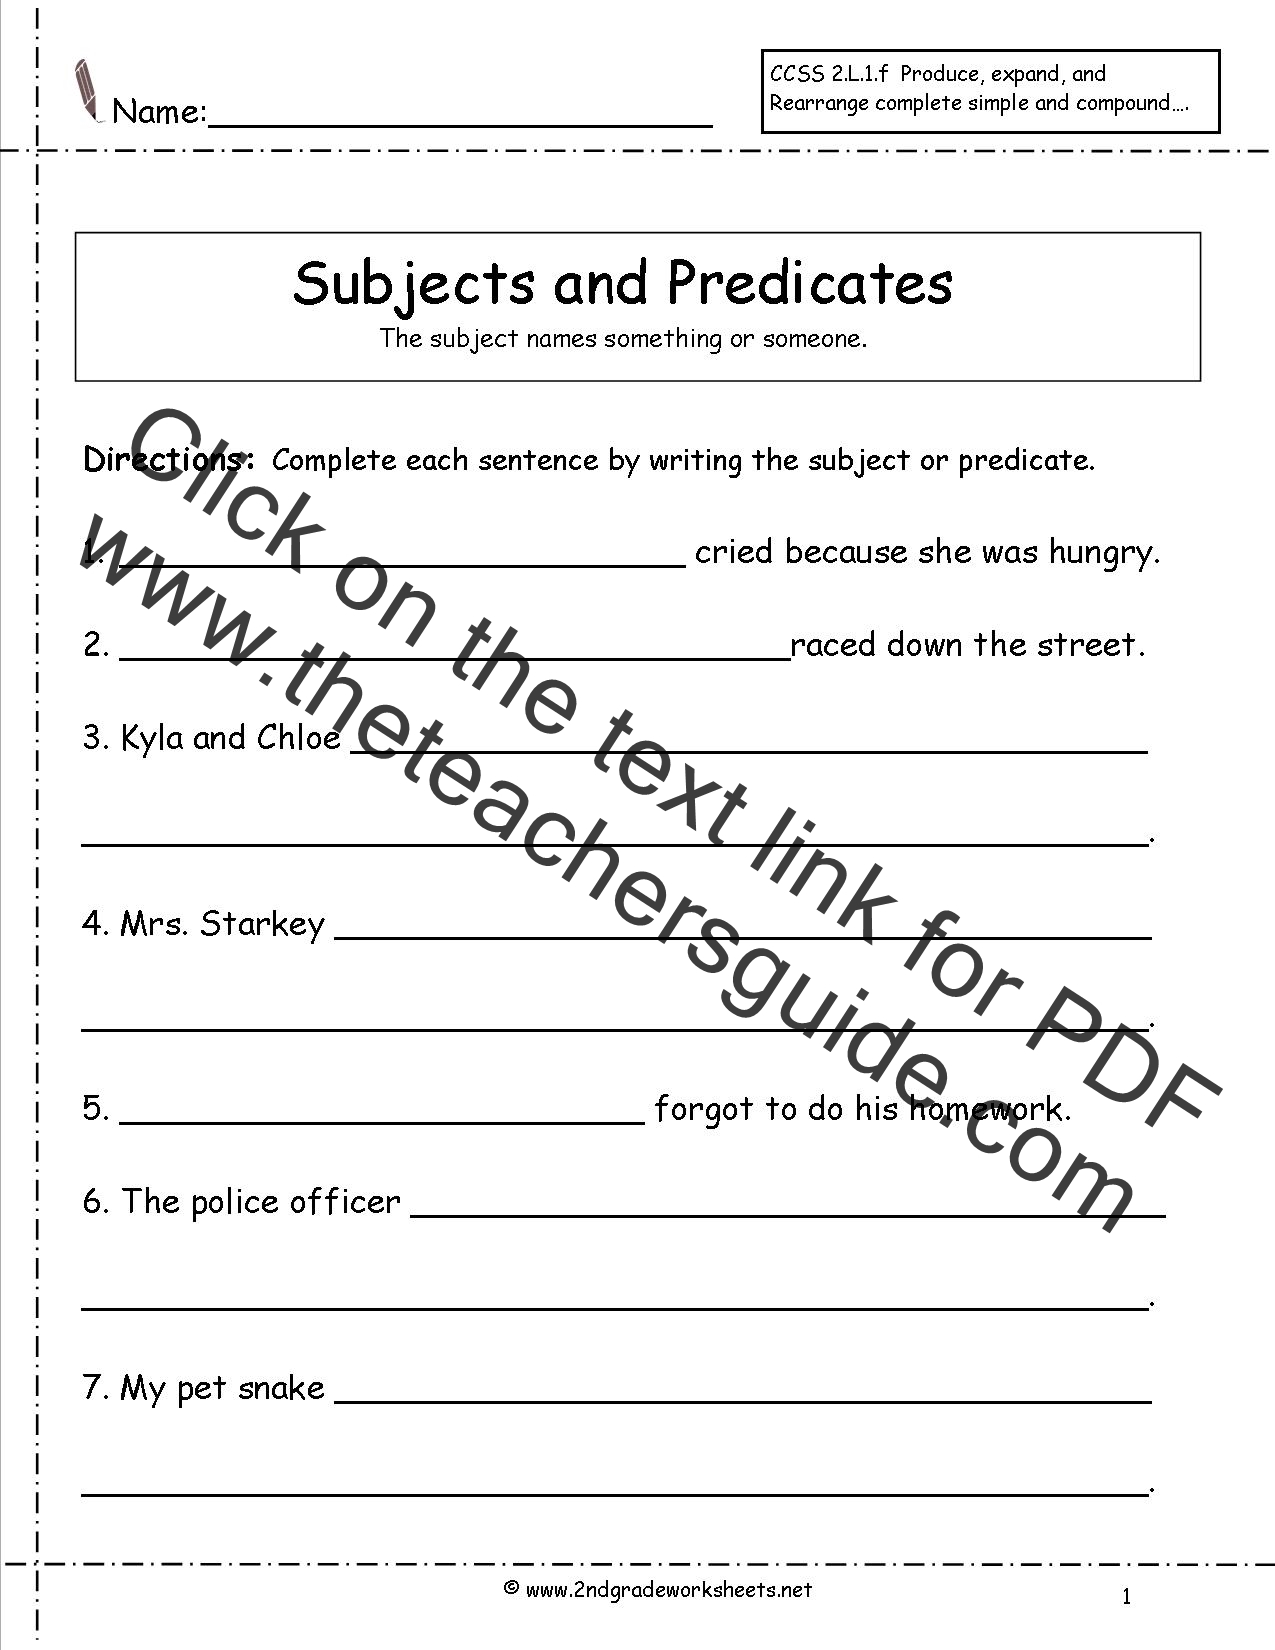 Building a thesis statement worksheet